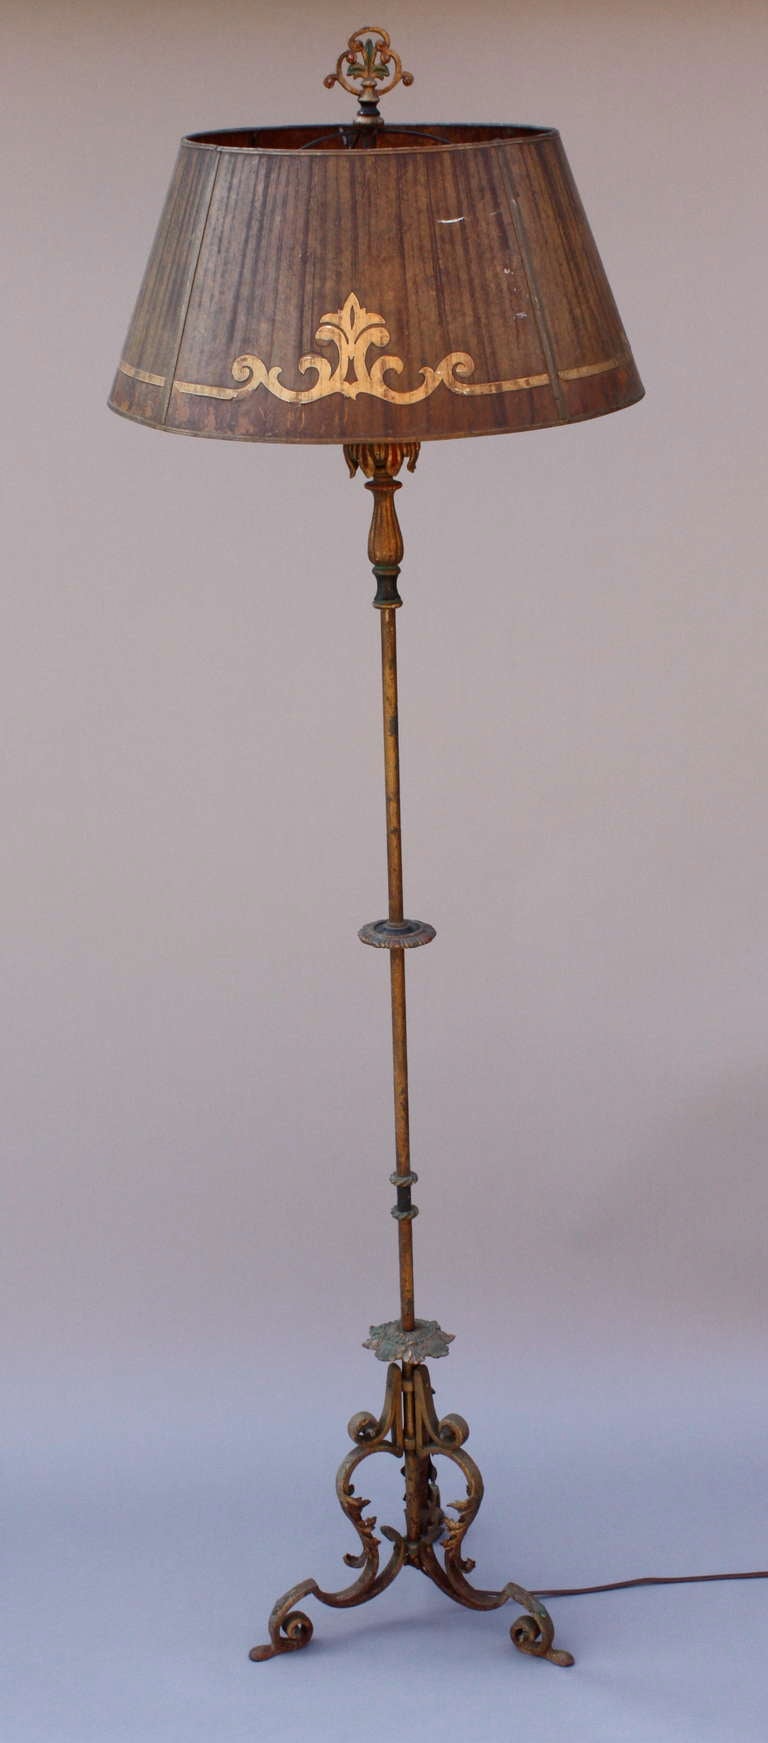 Classic 1920's floor lamp perfect for the Spanish Revival or Mediterranean style home.  Nice original finish with polychrome accents and original mica shade.